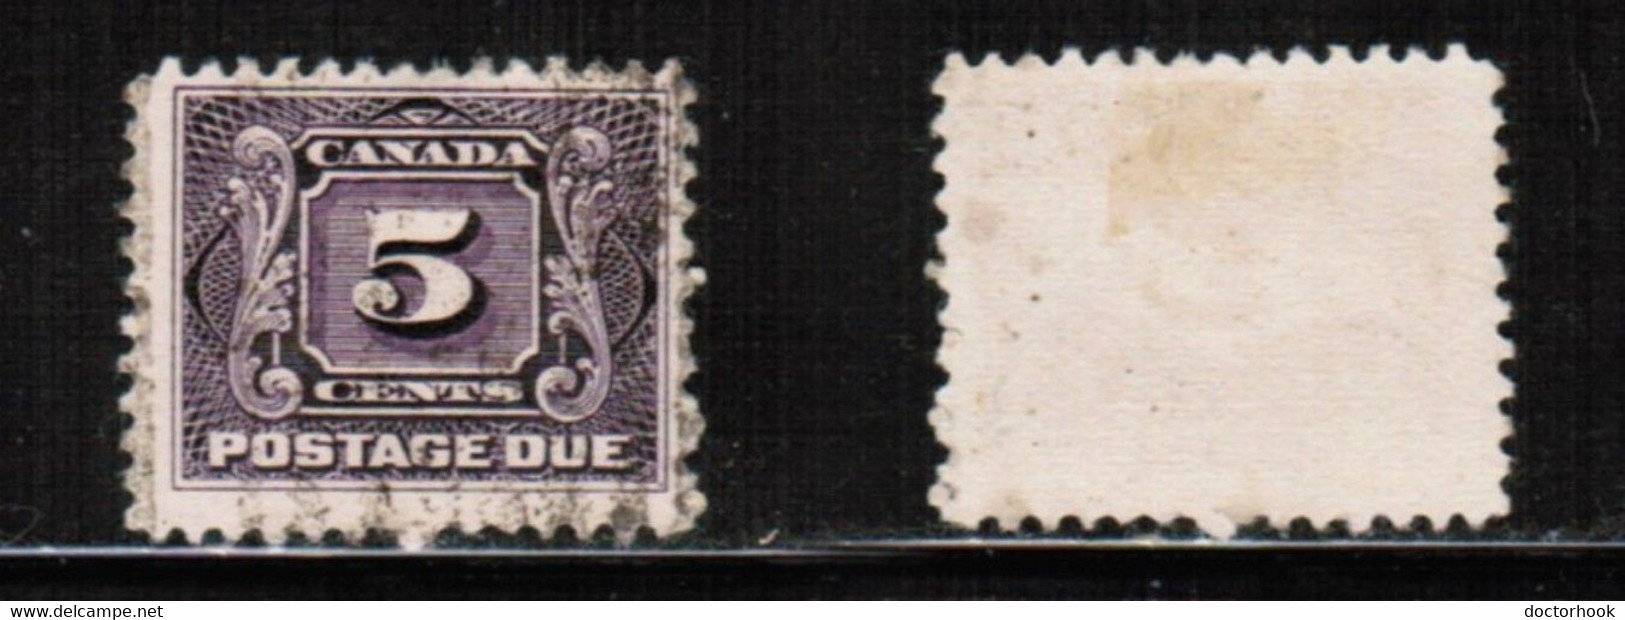 CANADA   Scott # J 4 USED (CONDITION AS PER SCAN) (CAN-101) - Postage Due